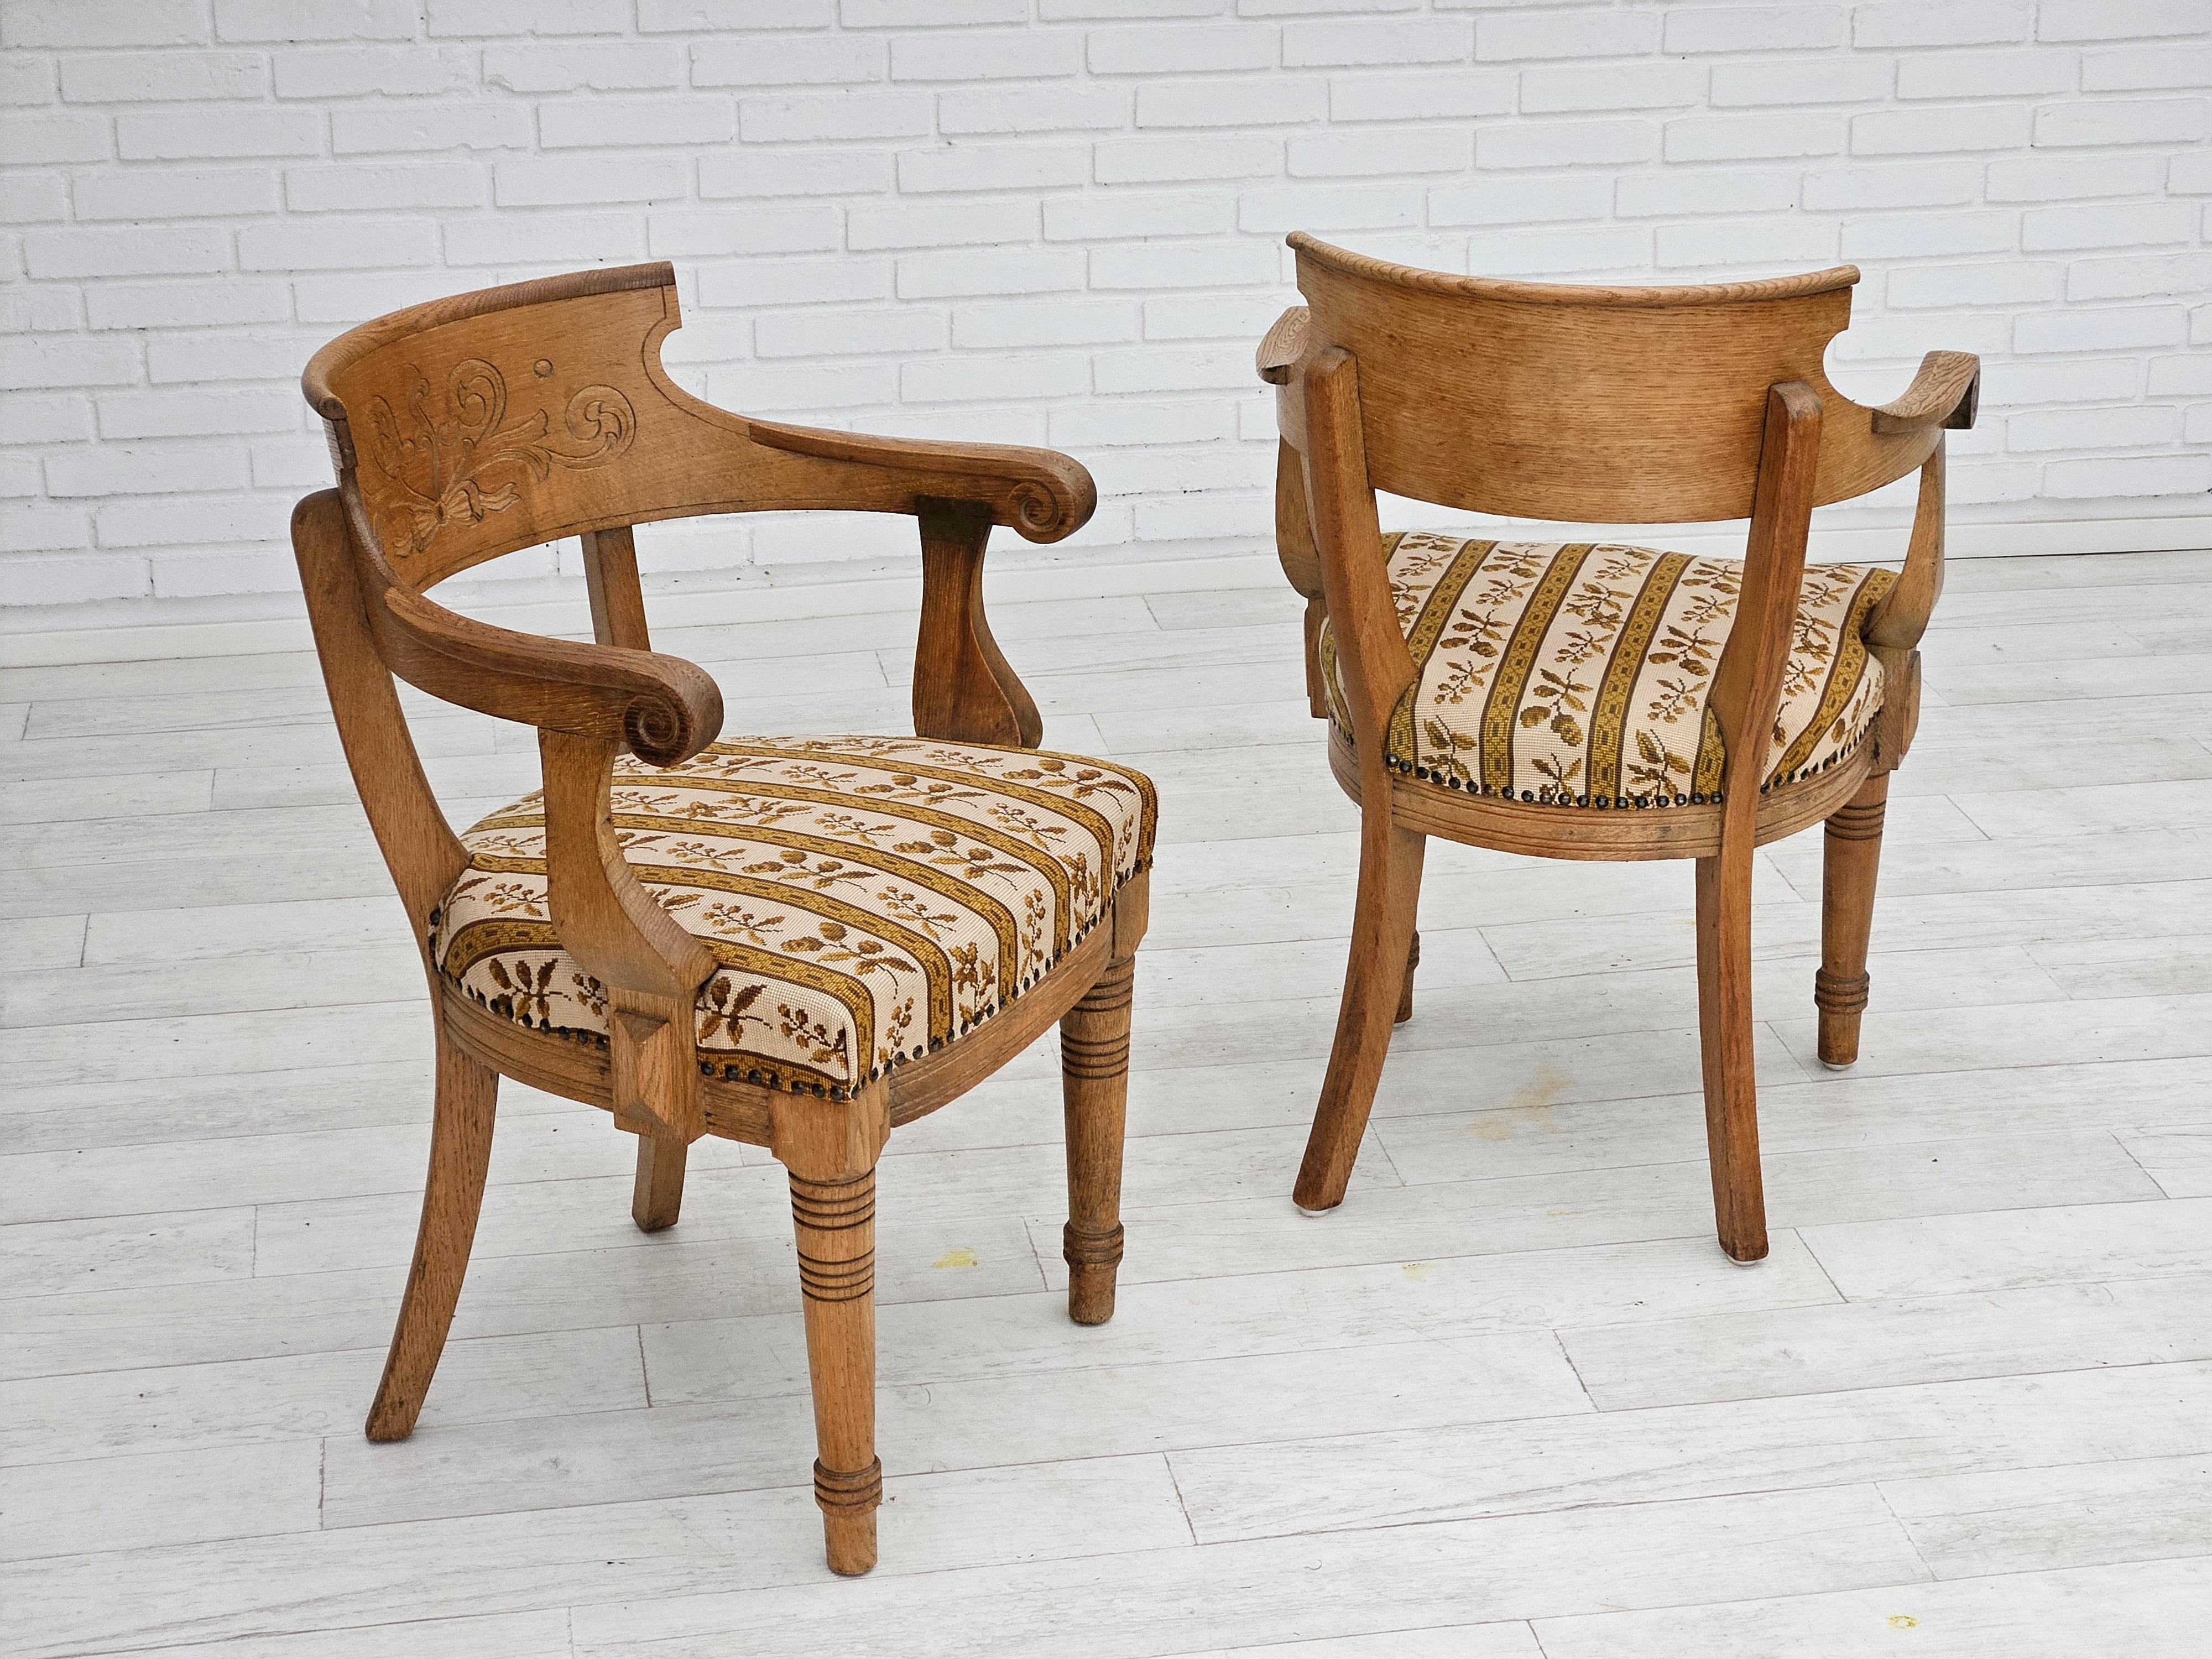 Scandinavian Modern 1940-50s, Danish design, pair of two armchairs in original very good condition. For Sale